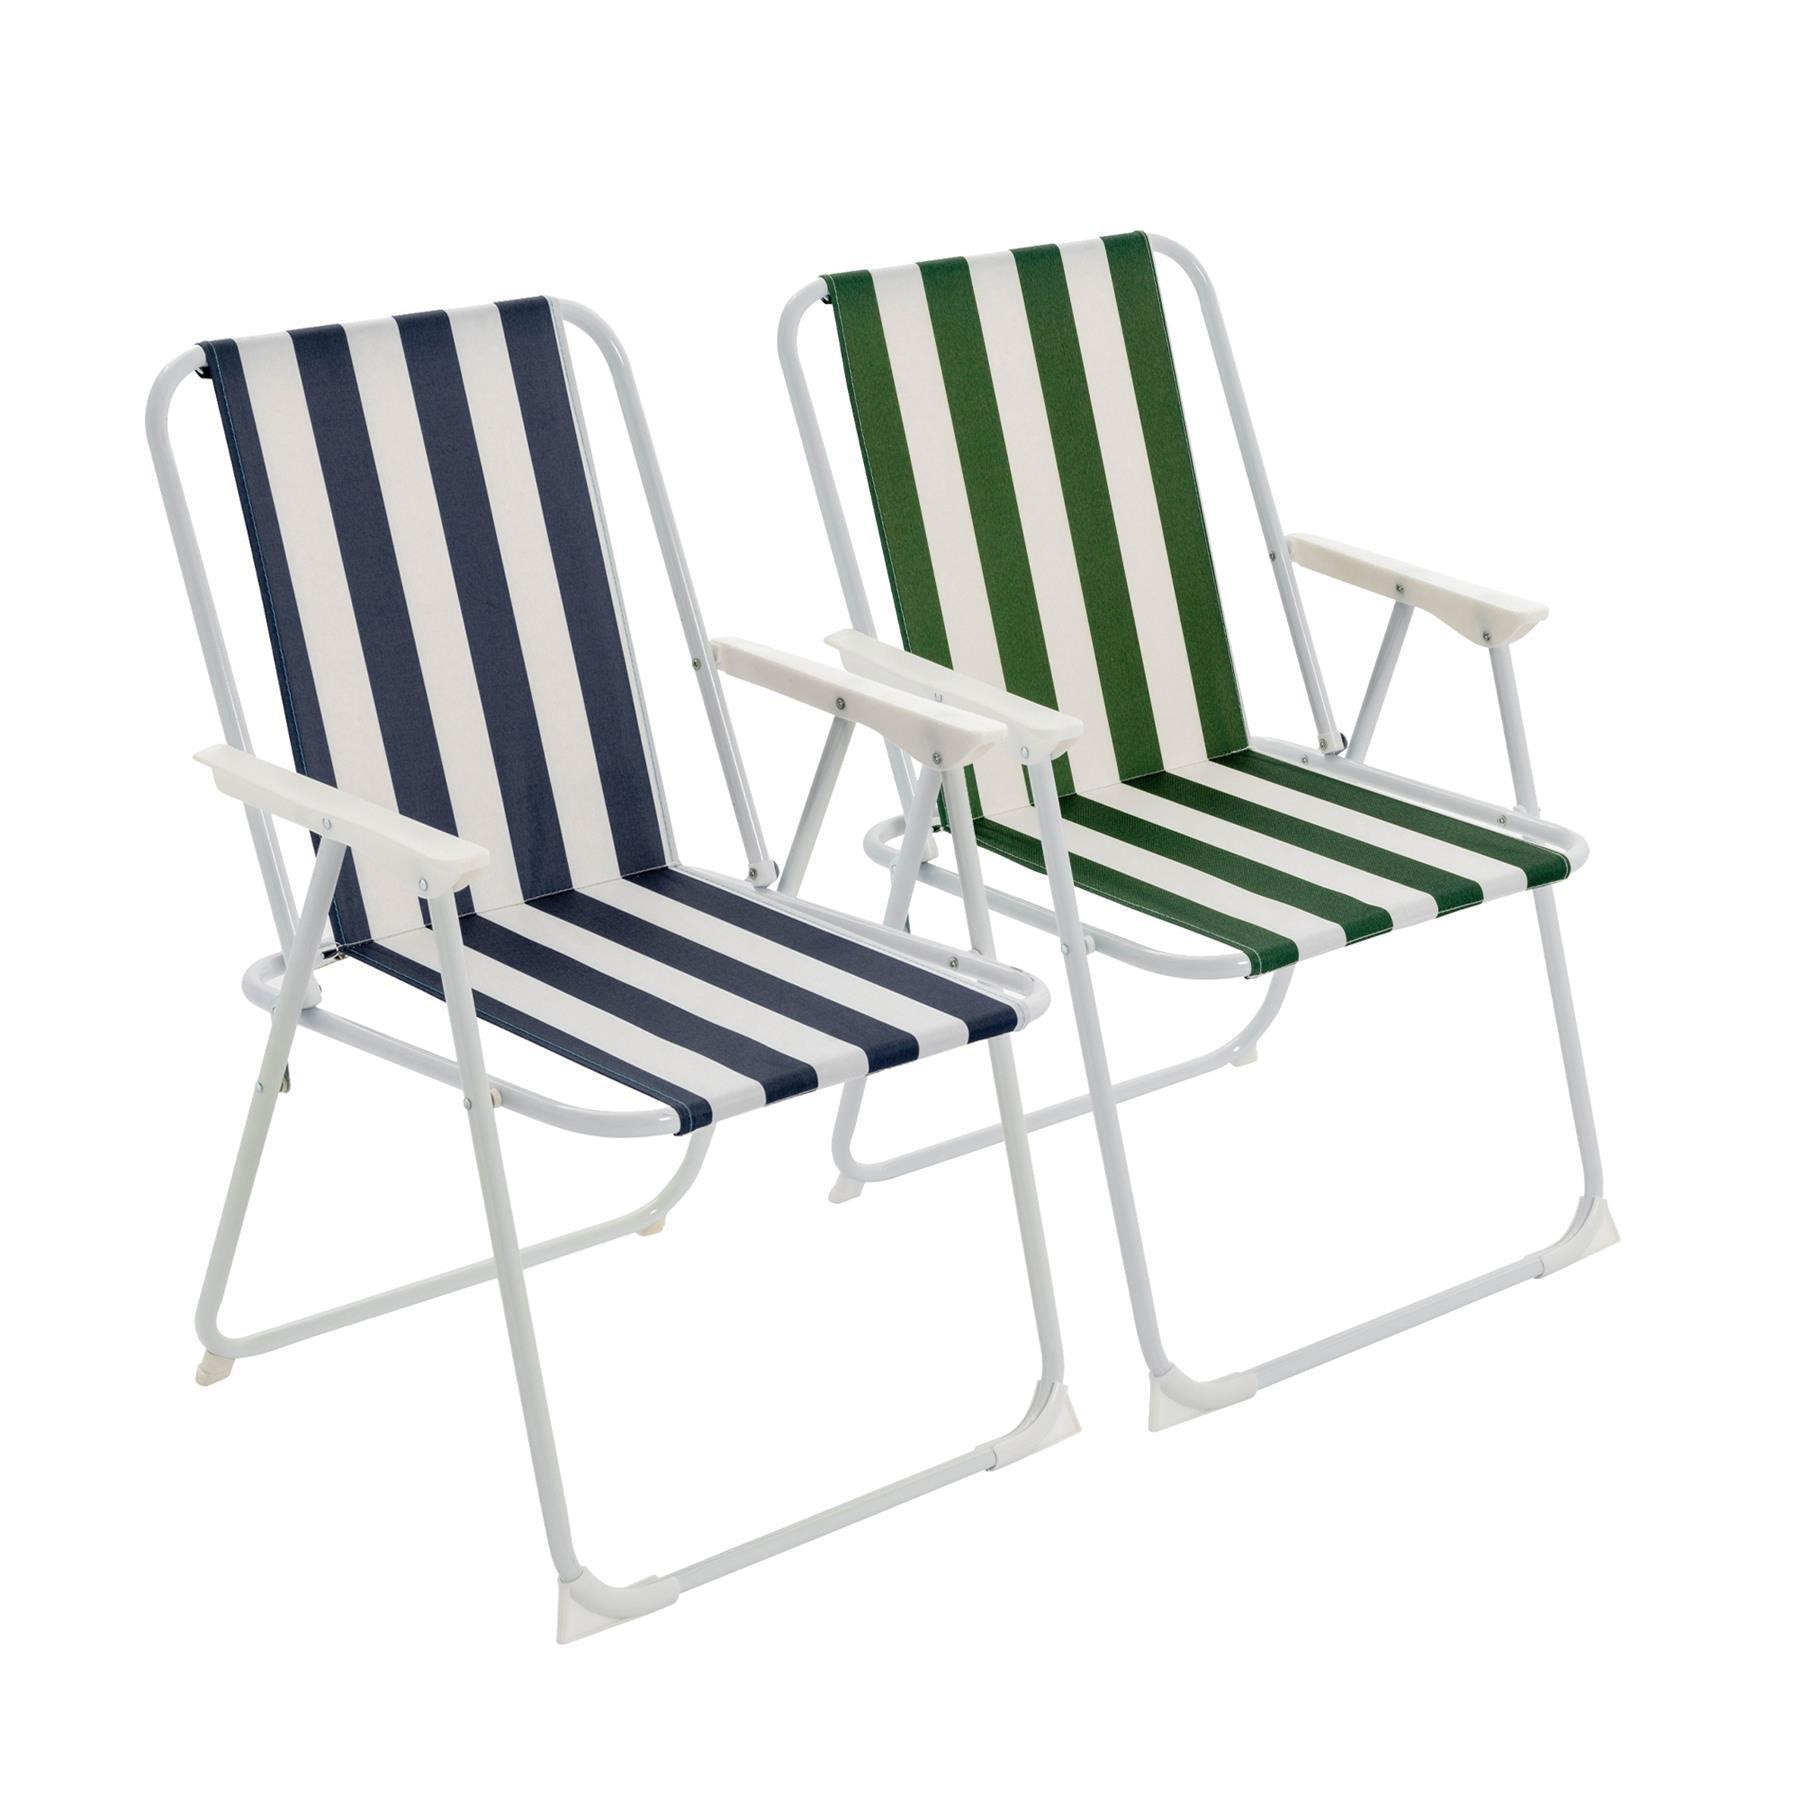 Folding Metal Beach Chairs Blue/Green Stripe Pack of 2 - image 1